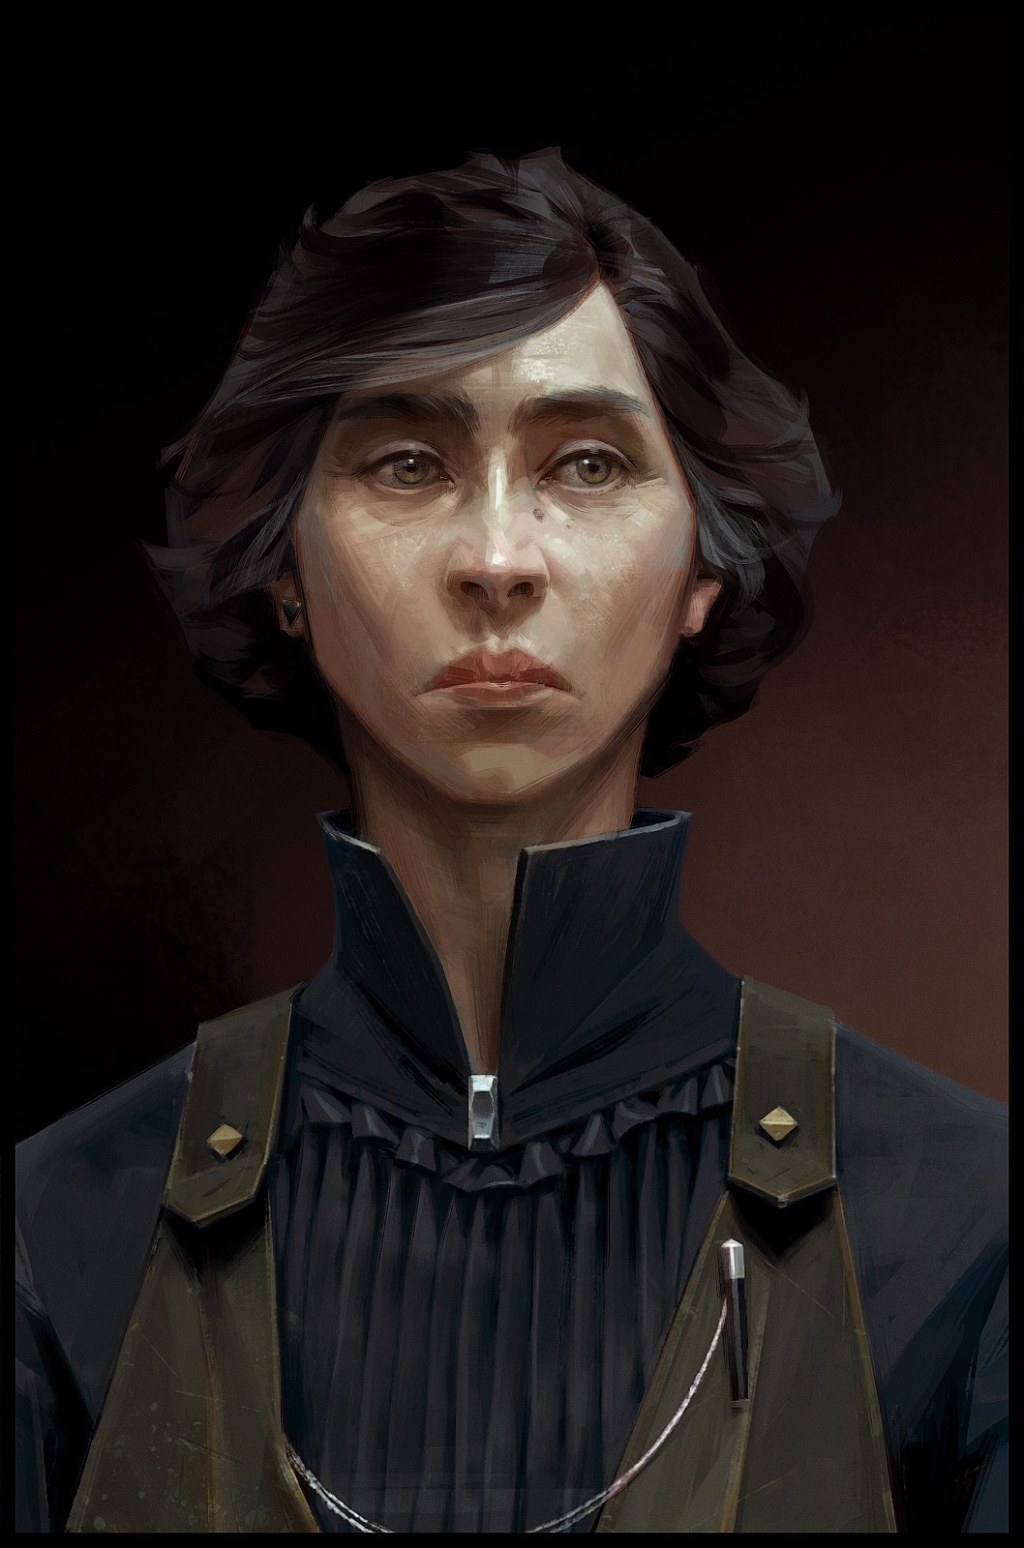 dishonored 2 concept art - ArtStation - Concept art for Dishonored